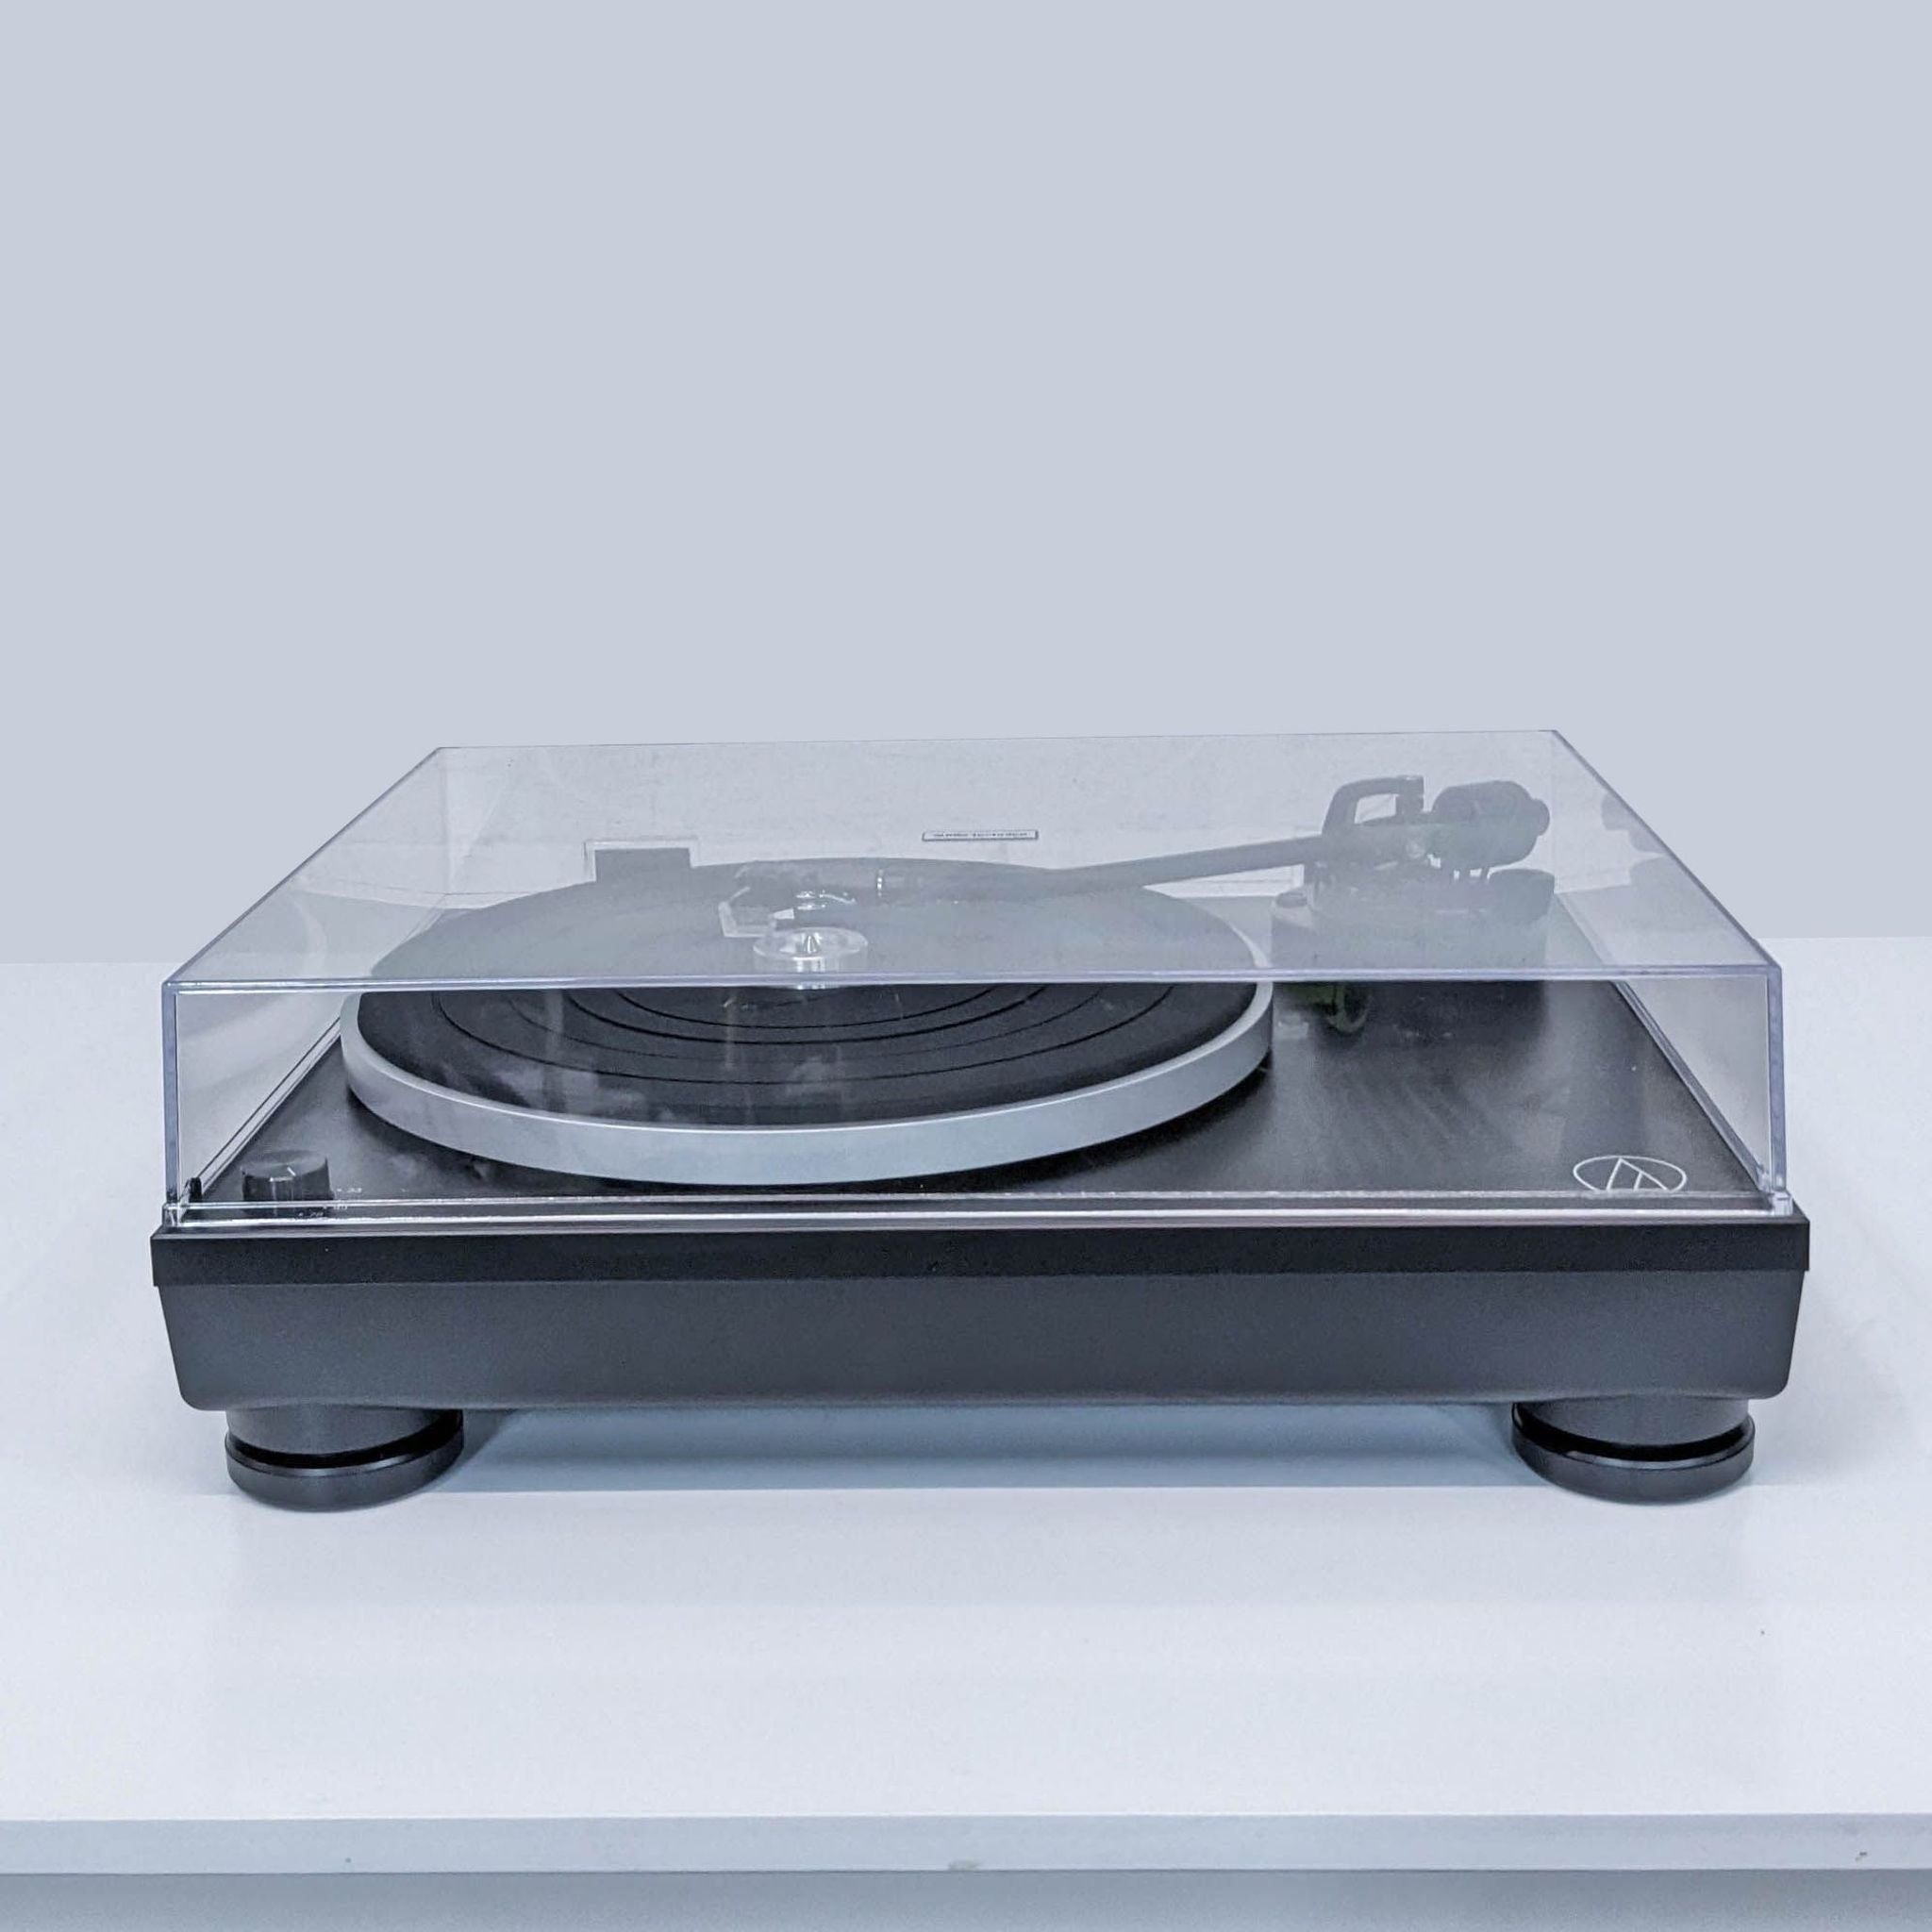 Audio-Technica turntable with transparent dust cover on a gray surface.